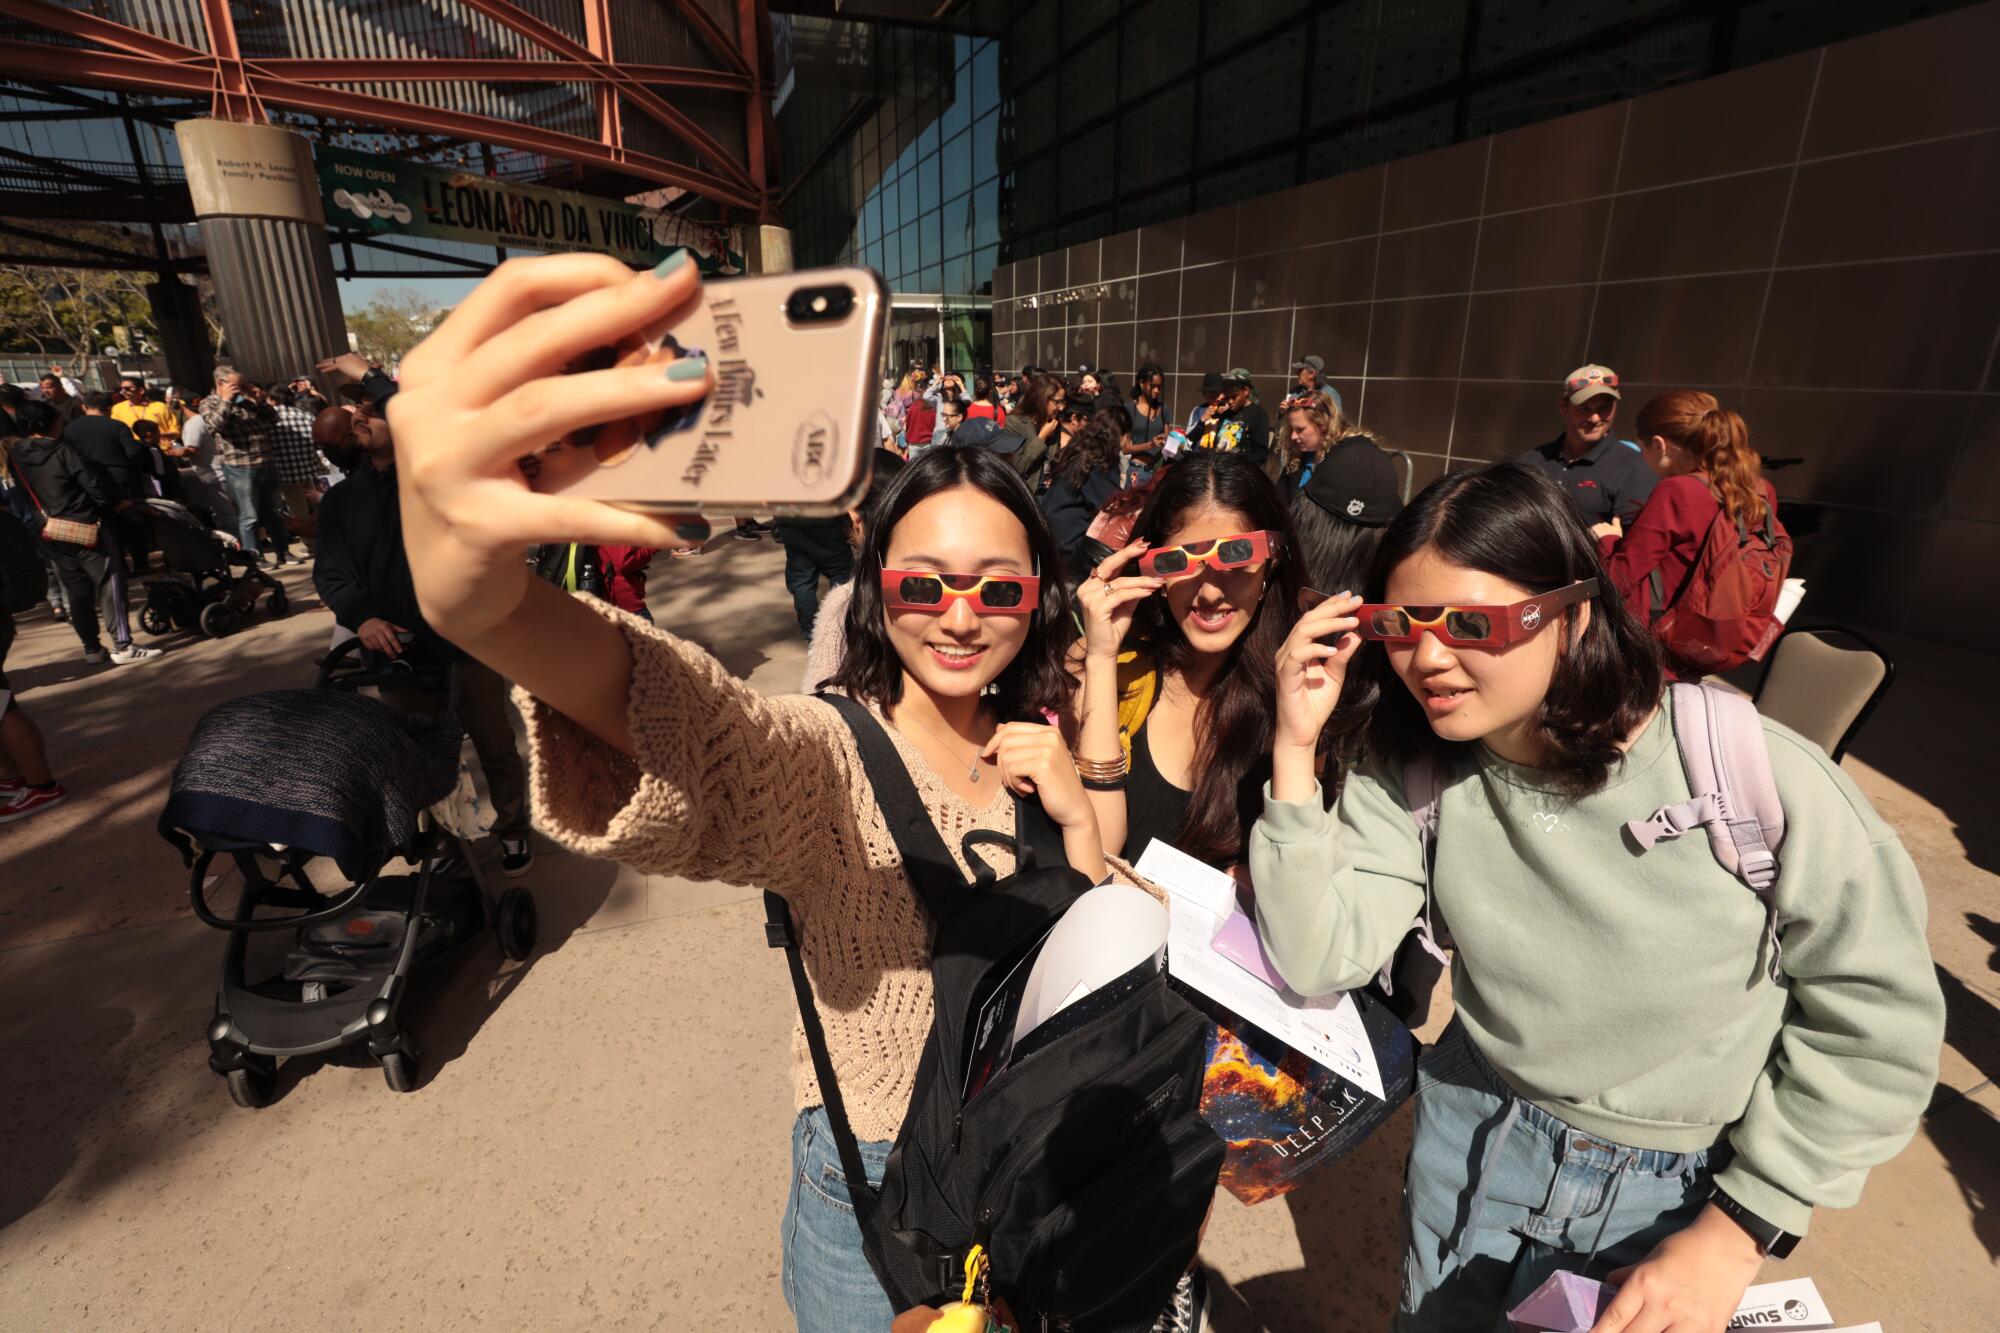 USC students take a selfie as part of the crowd that gathered at the California Science Center wearing protective eye-wear.